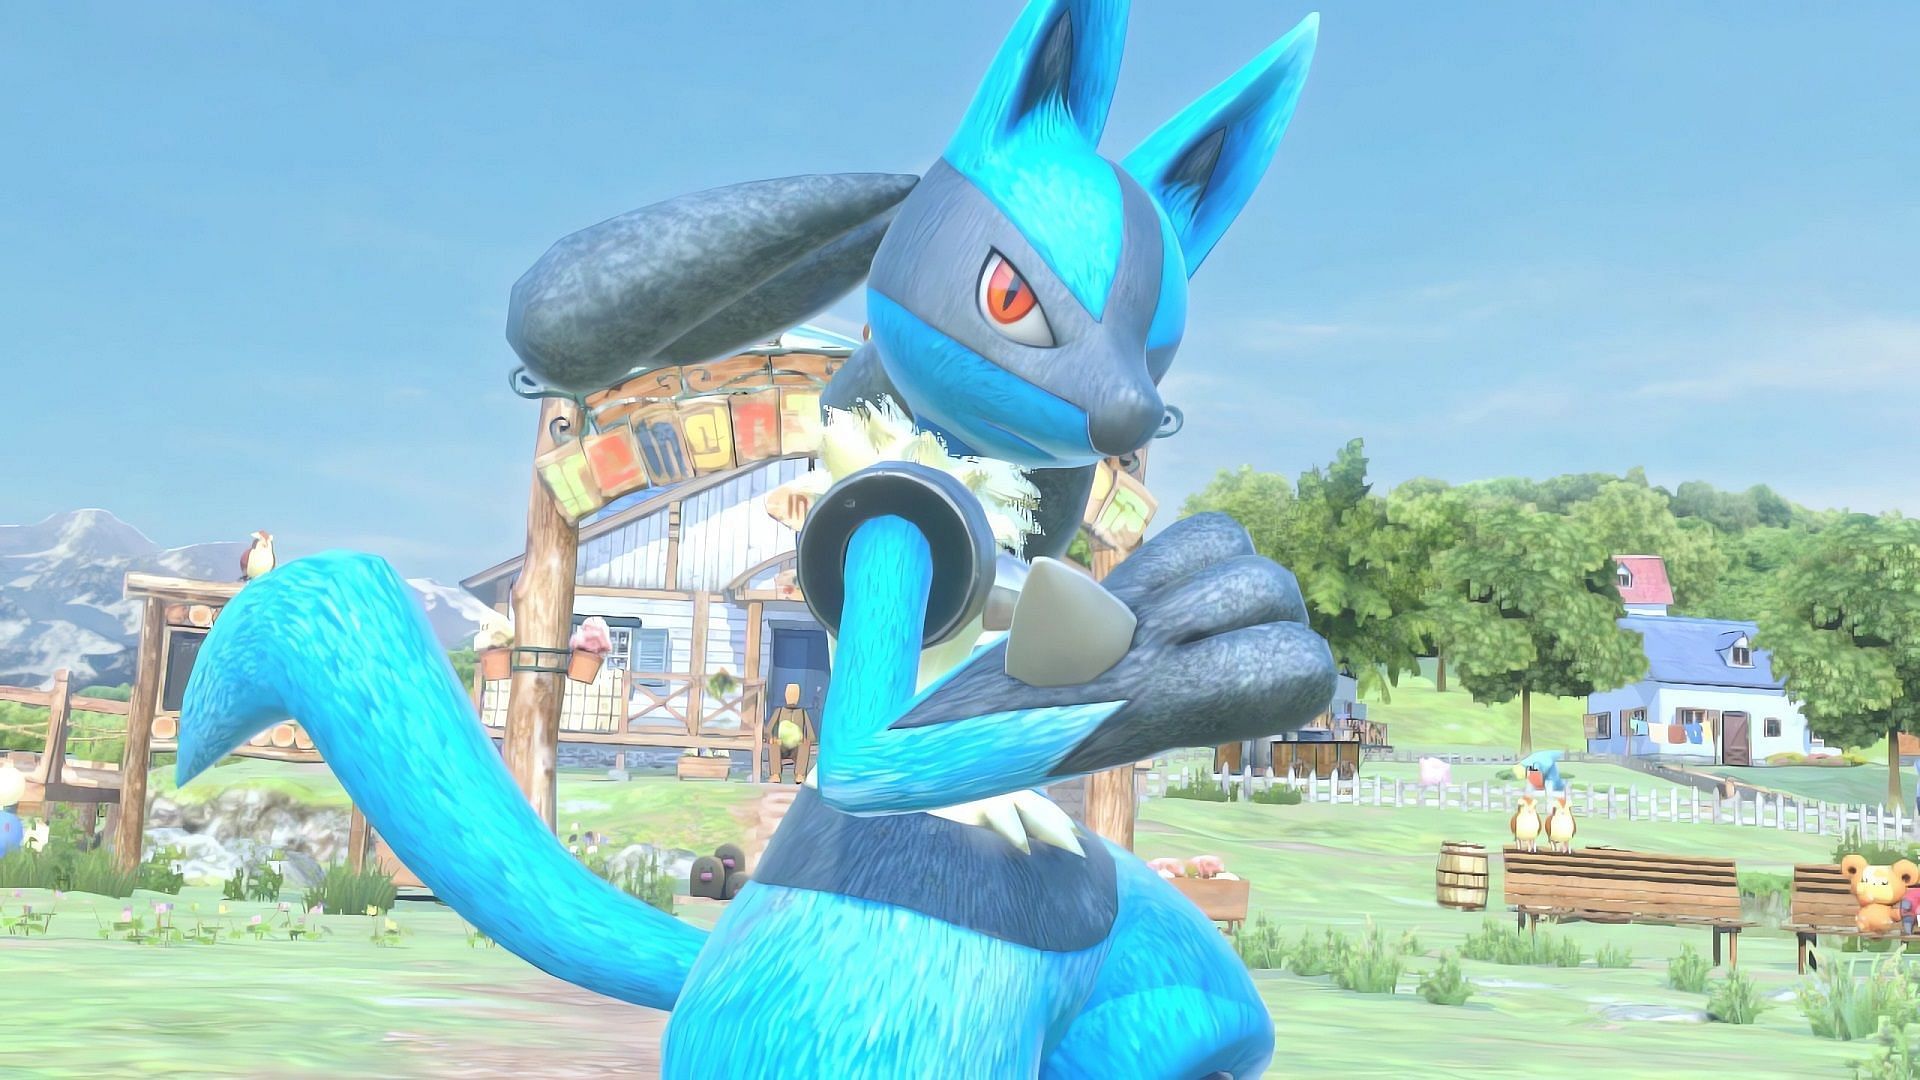 Lucario as it appears in Pokken Tournament, the Pokemon 3D fighting game for Nintendo Switch.